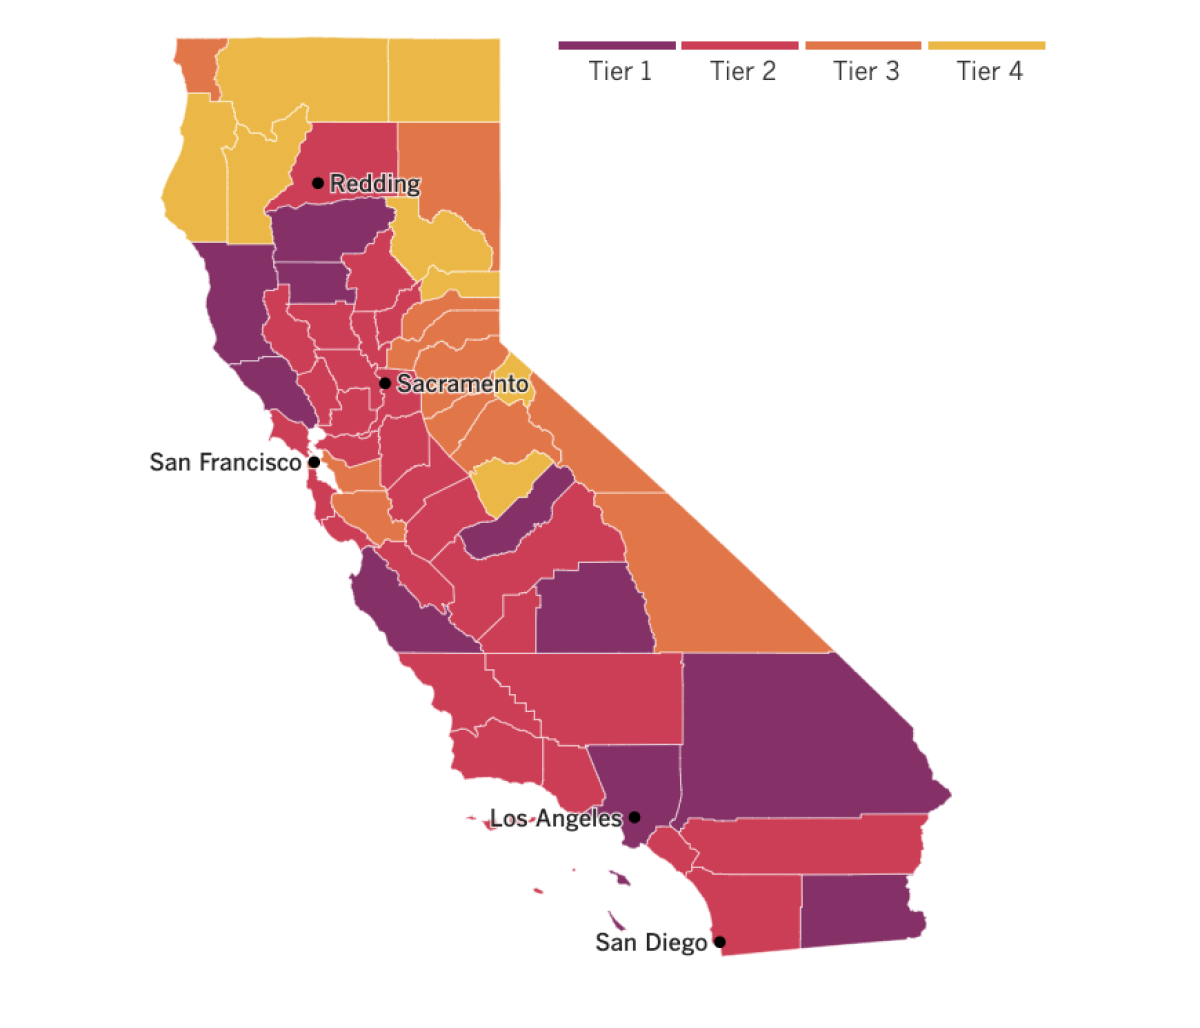 A map of California showing what tiers counties have been assigned to based on local coronavirus risk.